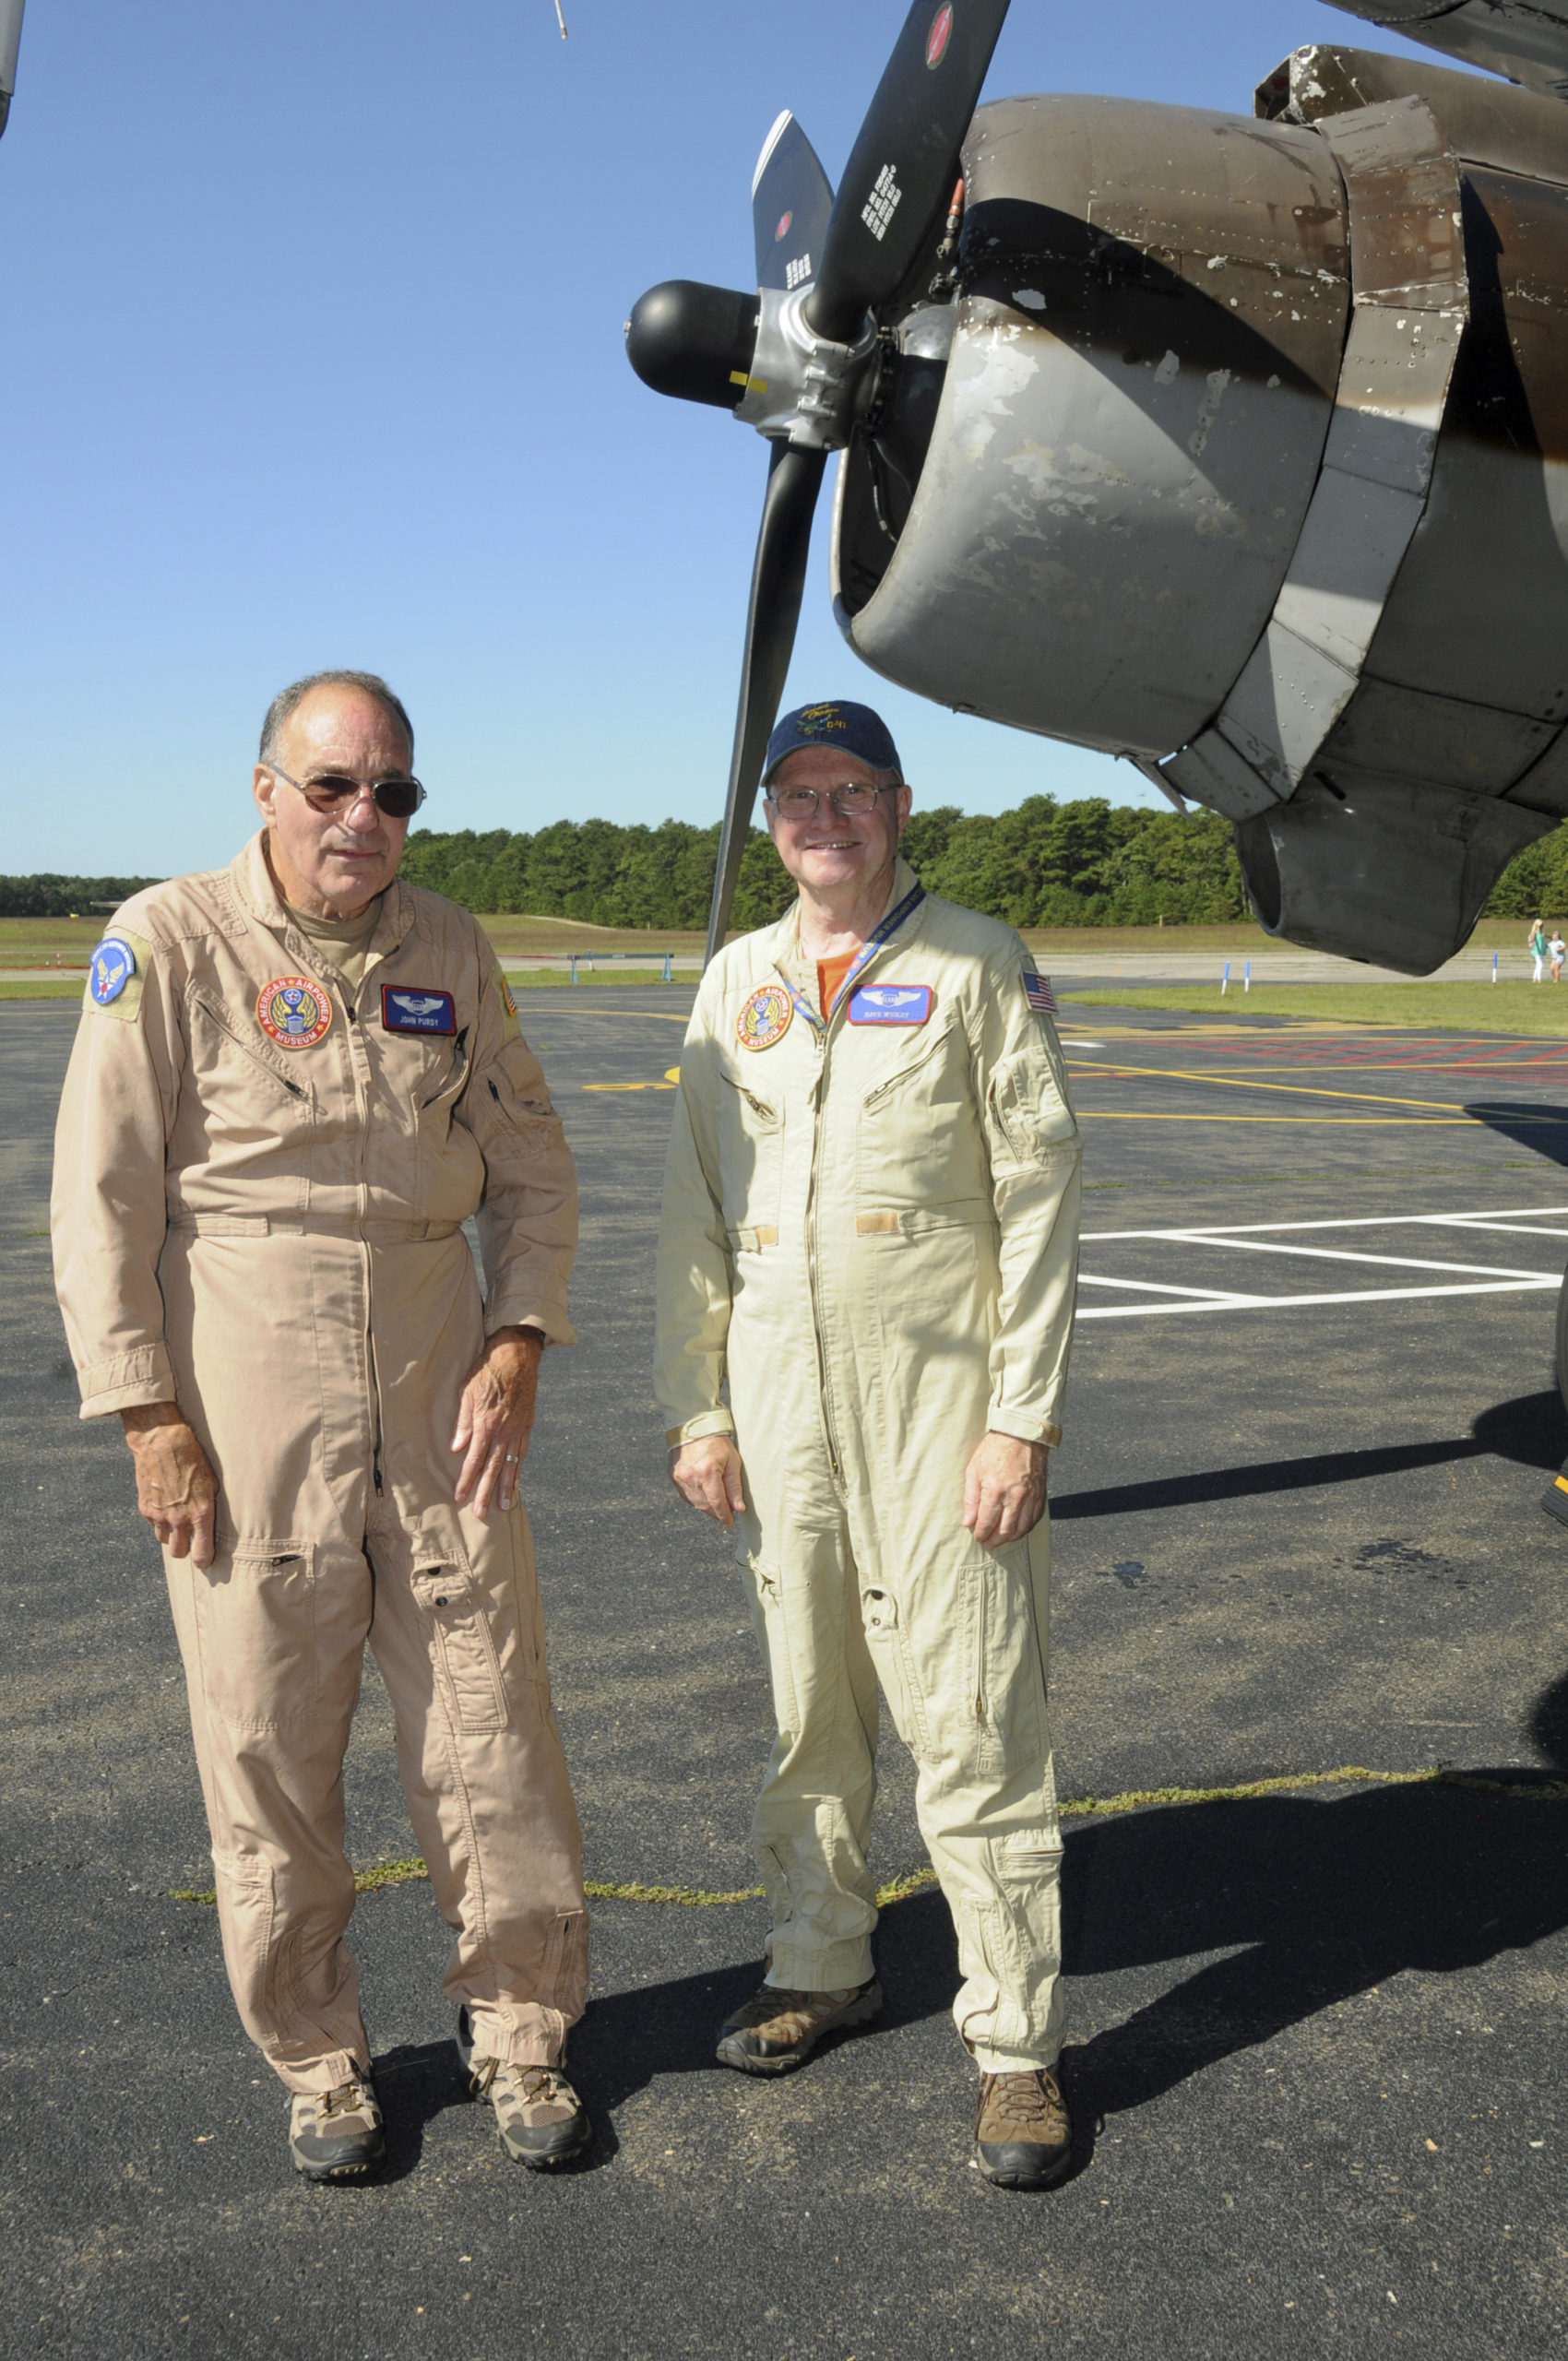 Pilots John Purdy and Dave Wigley flew their plane from Farmingdale to the East Hampton Aviation Association's 